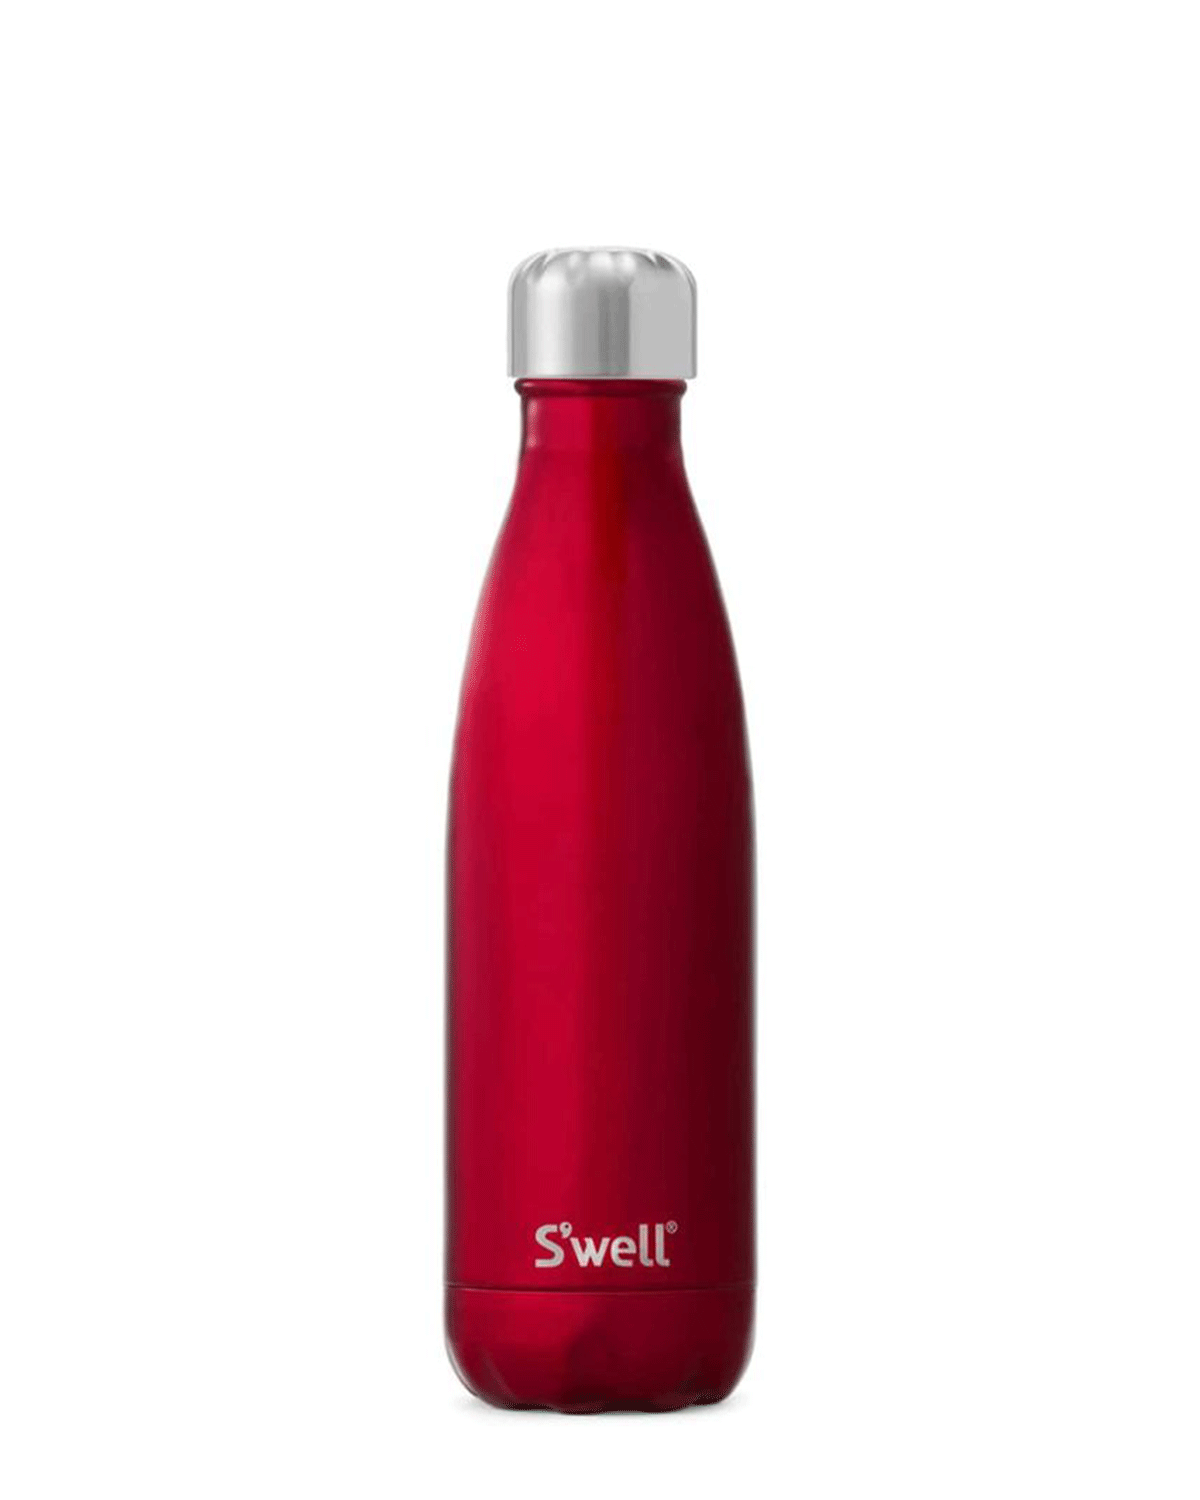 S'well Rowboat Red 25 oz Bottle